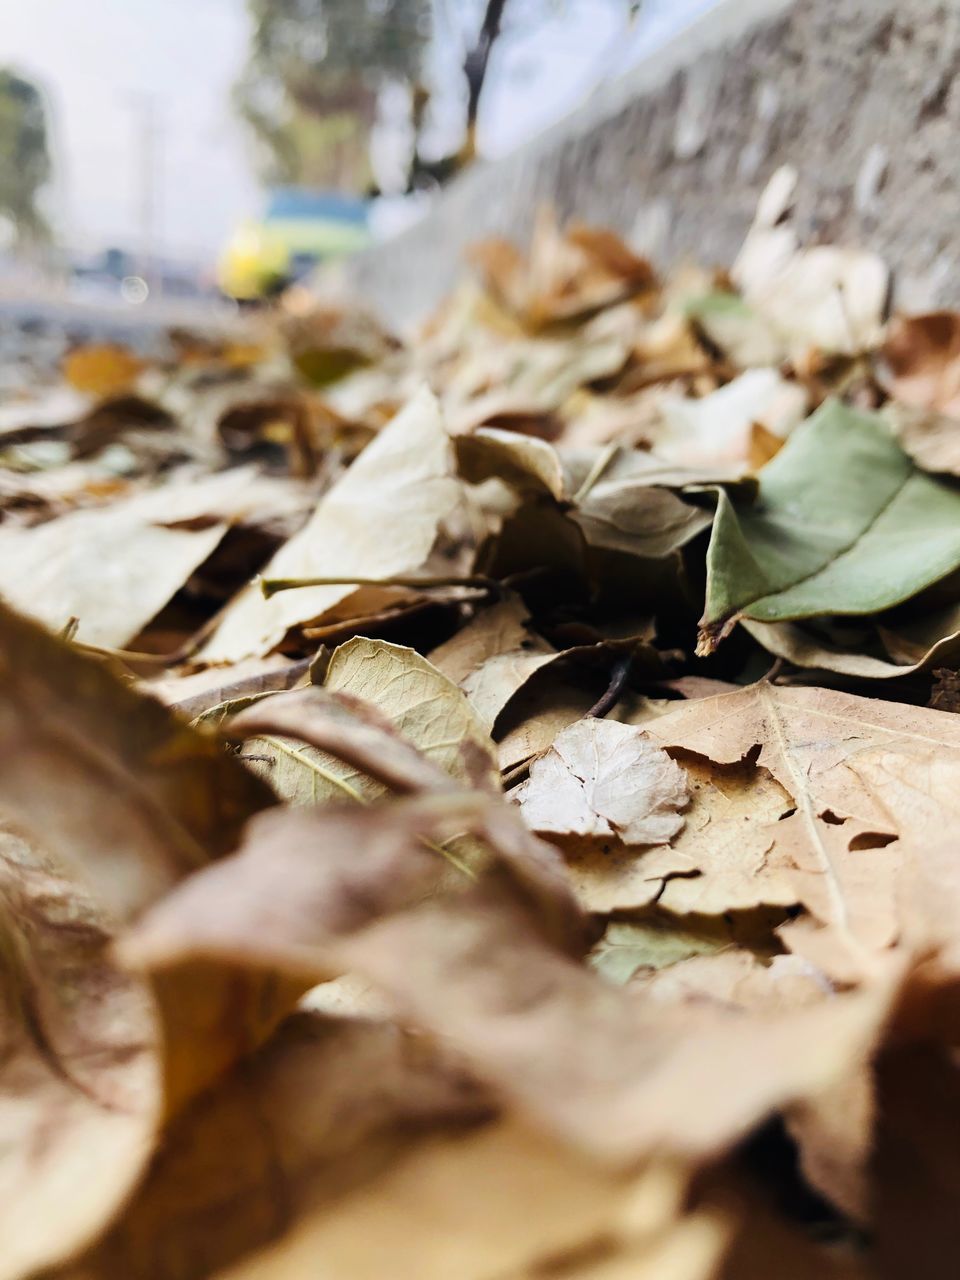 leaf, plant part, selective focus, leaves, close-up, dry, change, day, nature, autumn, no people, vulnerability, surface level, falling, fragility, outdoors, beauty in nature, plant, field, land, dried, natural condition